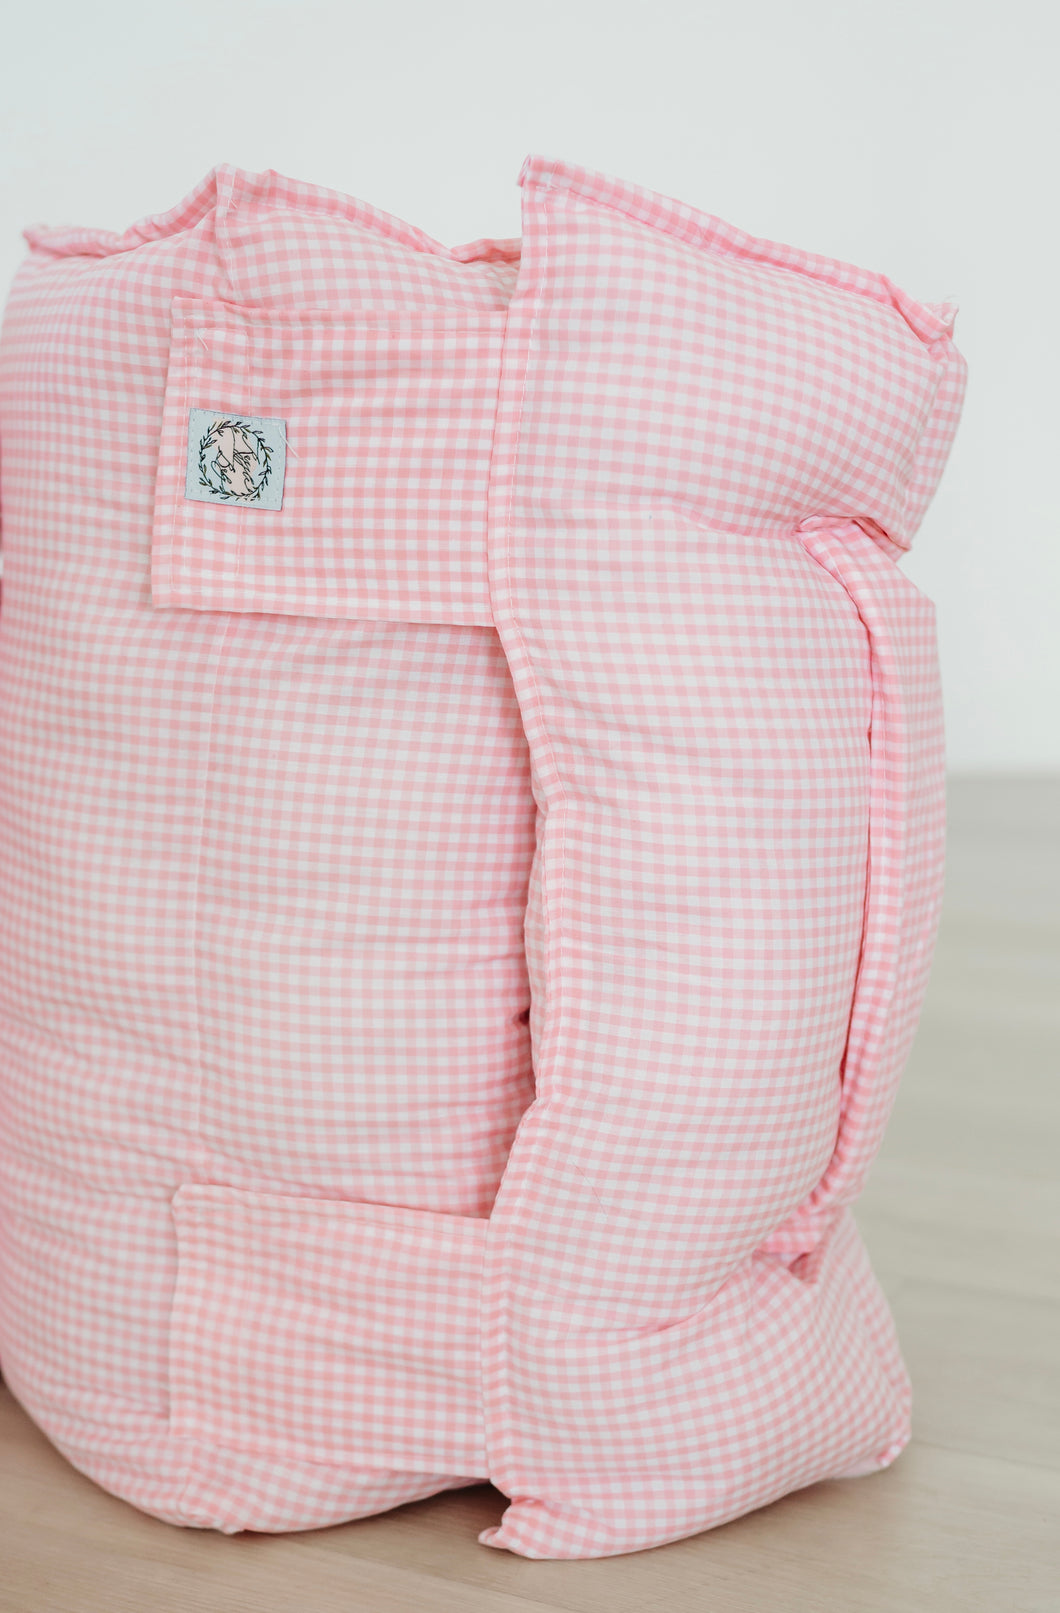 Small pink & white gingham